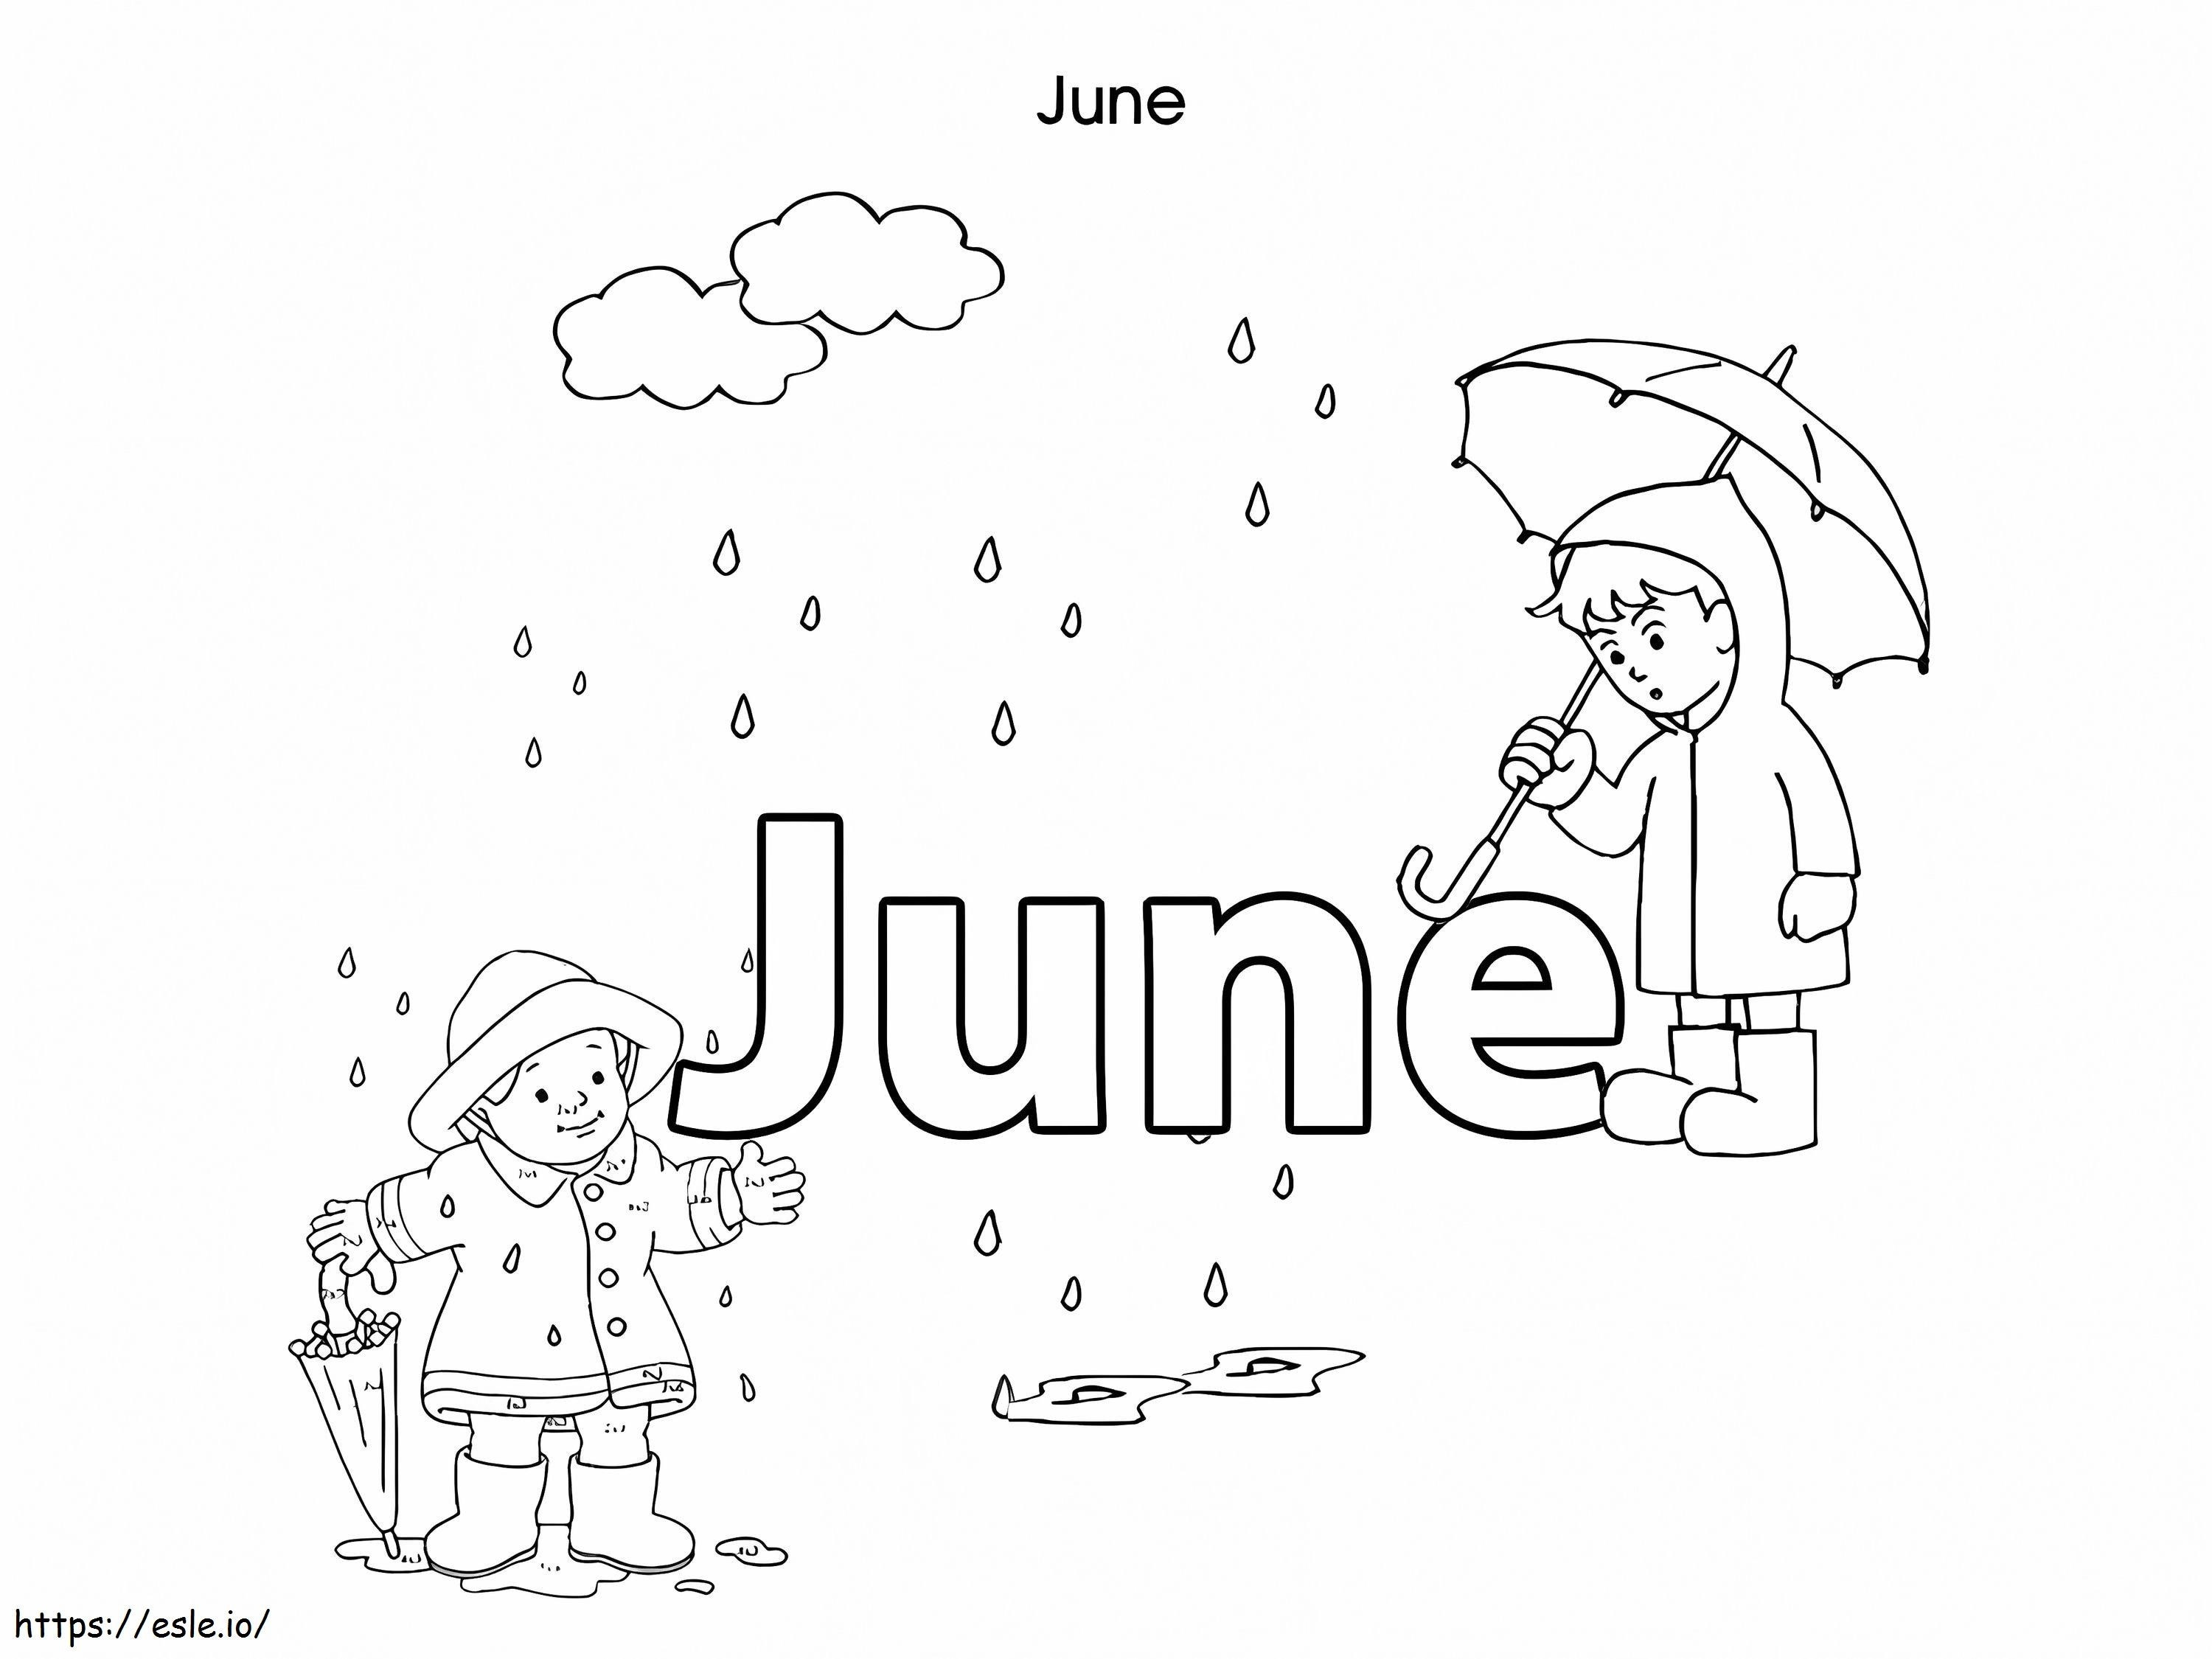 June 6 coloring page